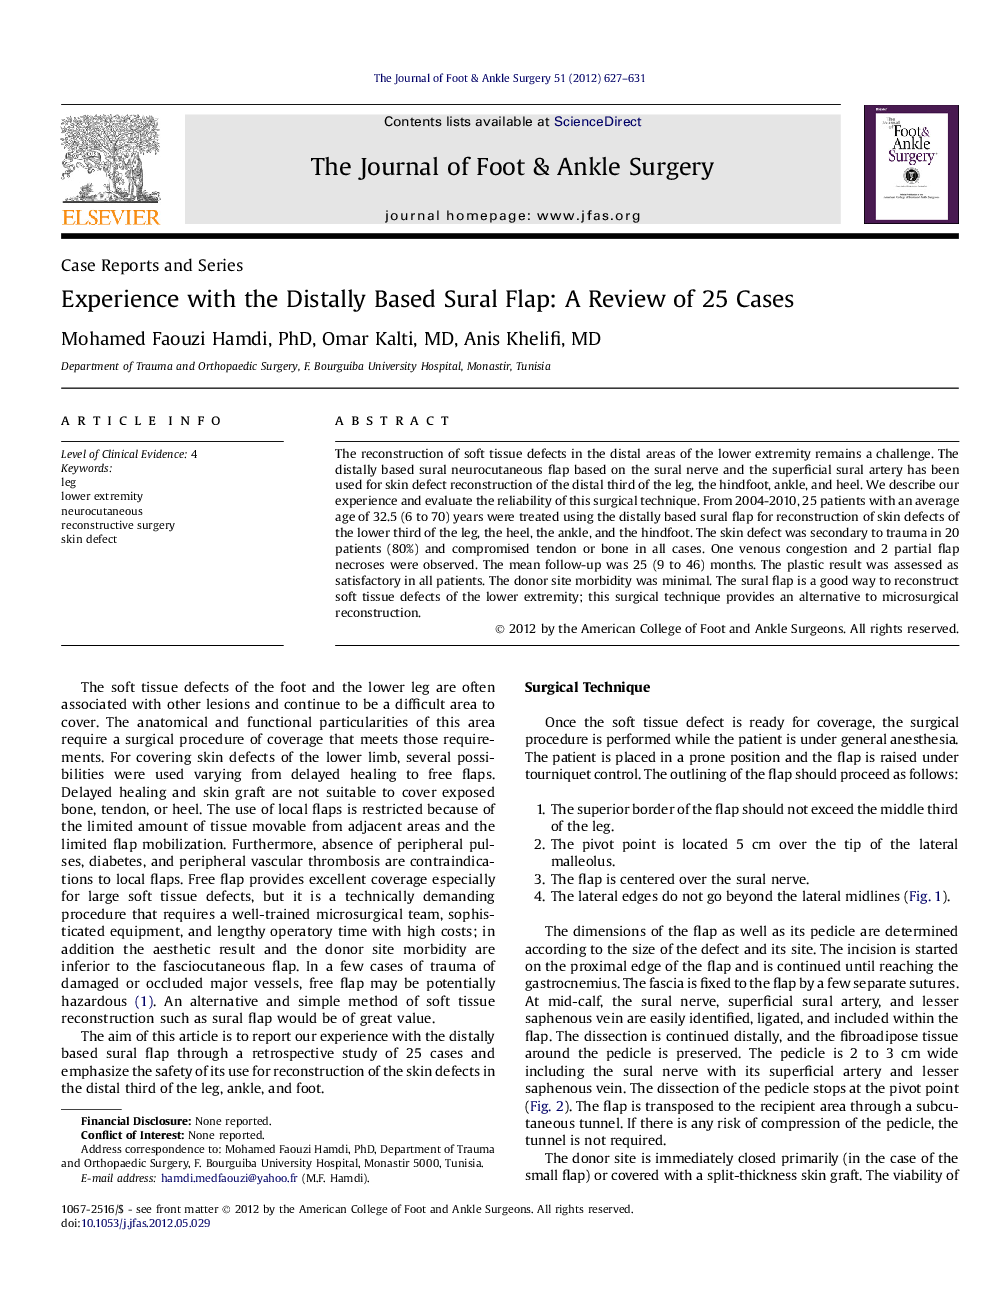 Experience with the Distally Based Sural Flap: A Review of 25 Cases 